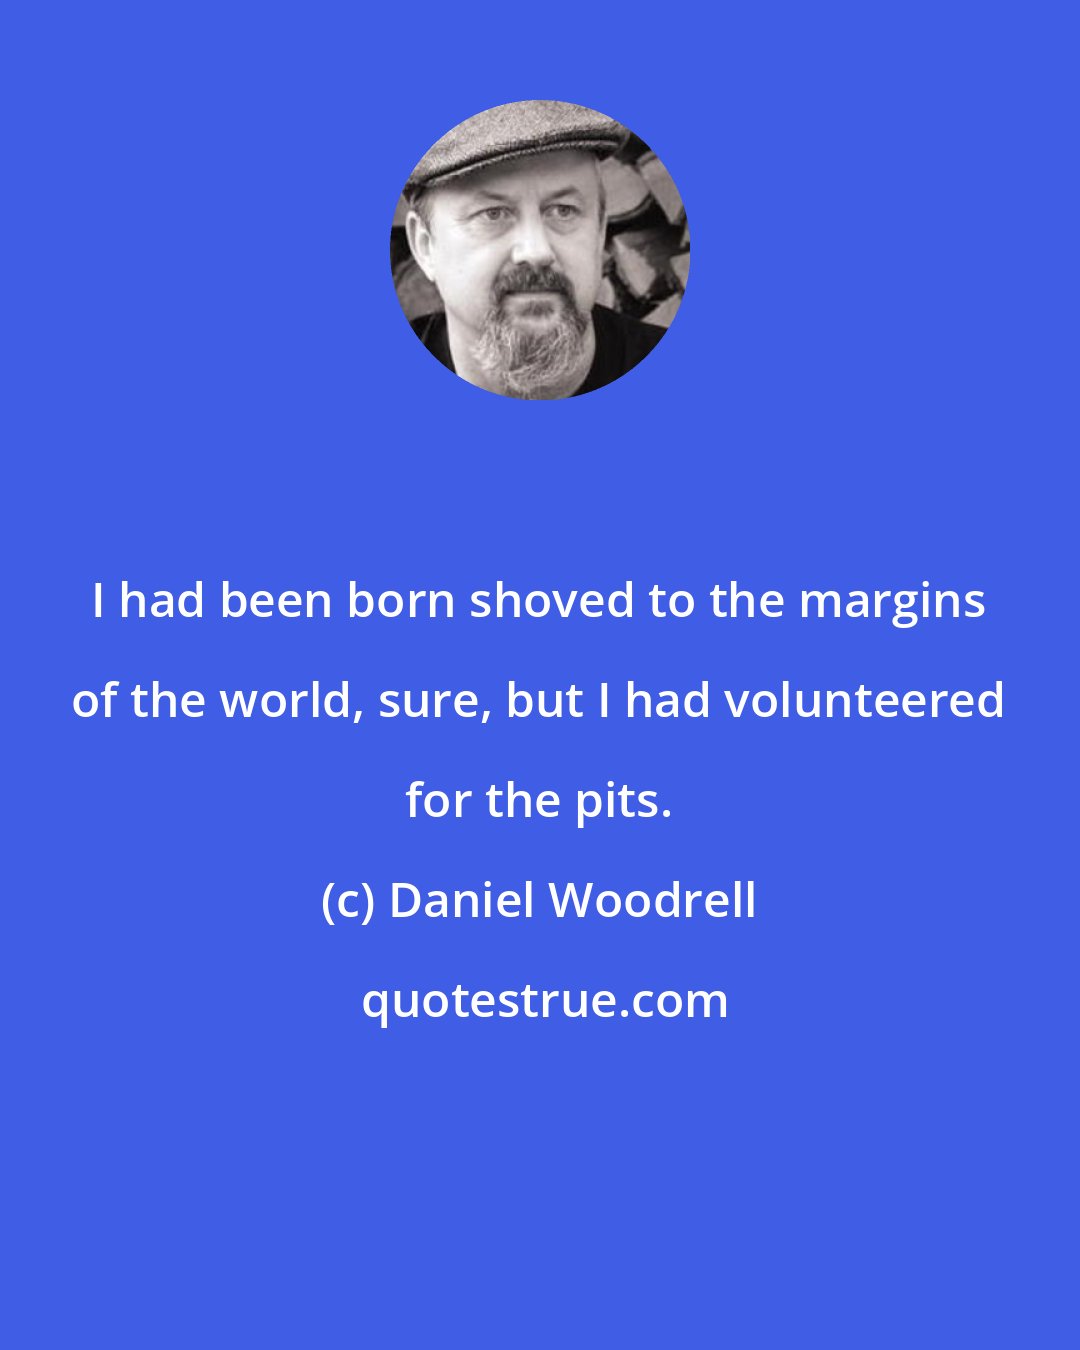 Daniel Woodrell: I had been born shoved to the margins of the world, sure, but I had volunteered for the pits.